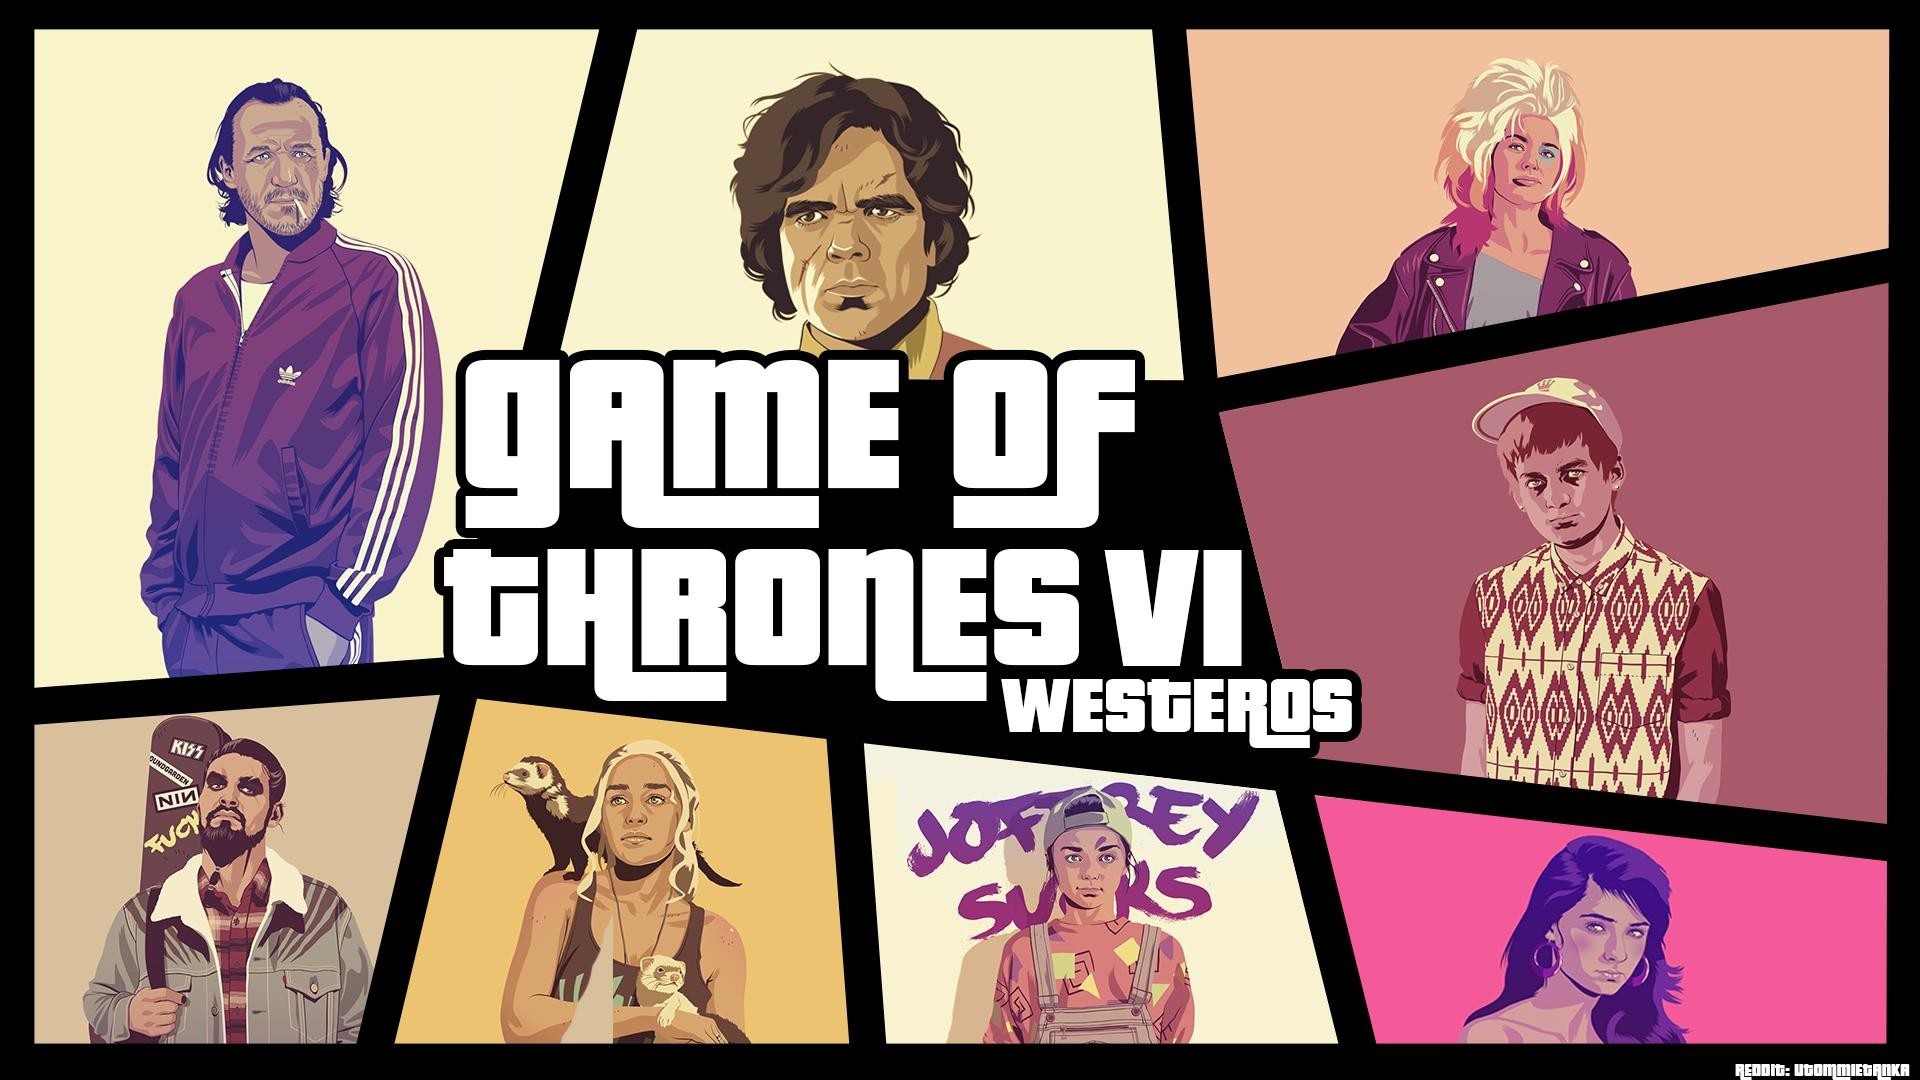 Game Of Thrones Grand Theft Auto IV Grand Theft Auto Crossover Parody Mix Up Video Games 1920x1080